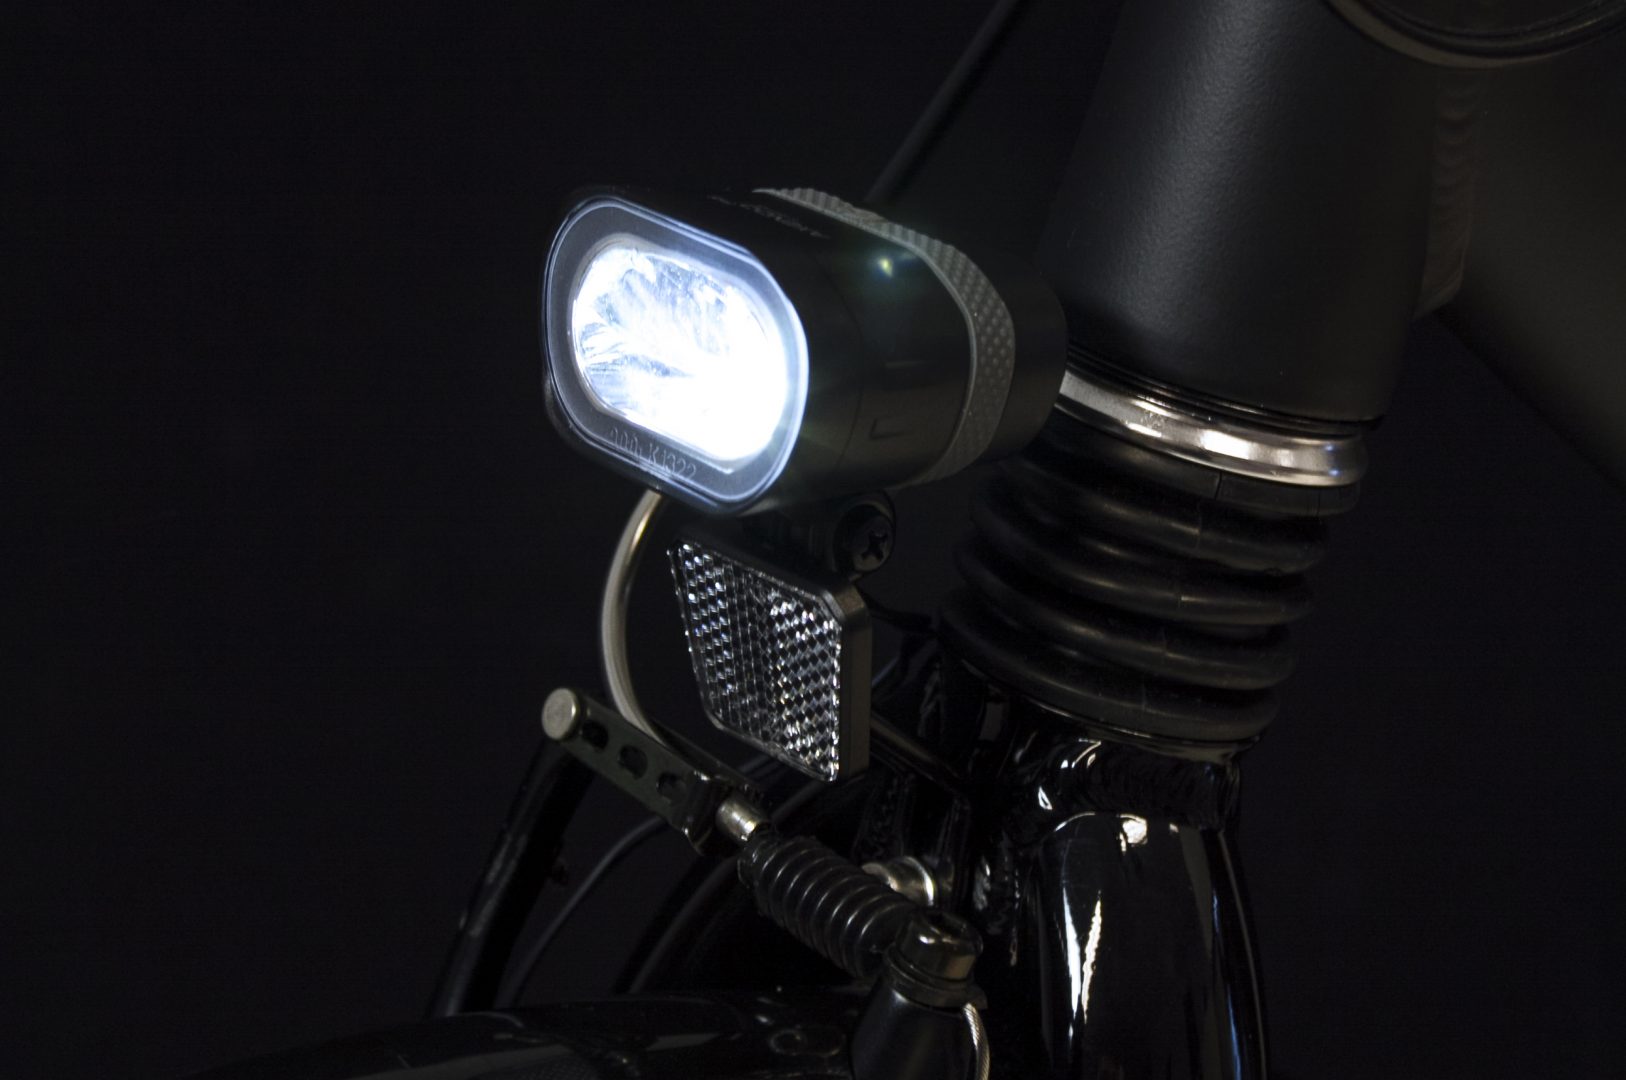 Axendo 40 headlamp on front fork